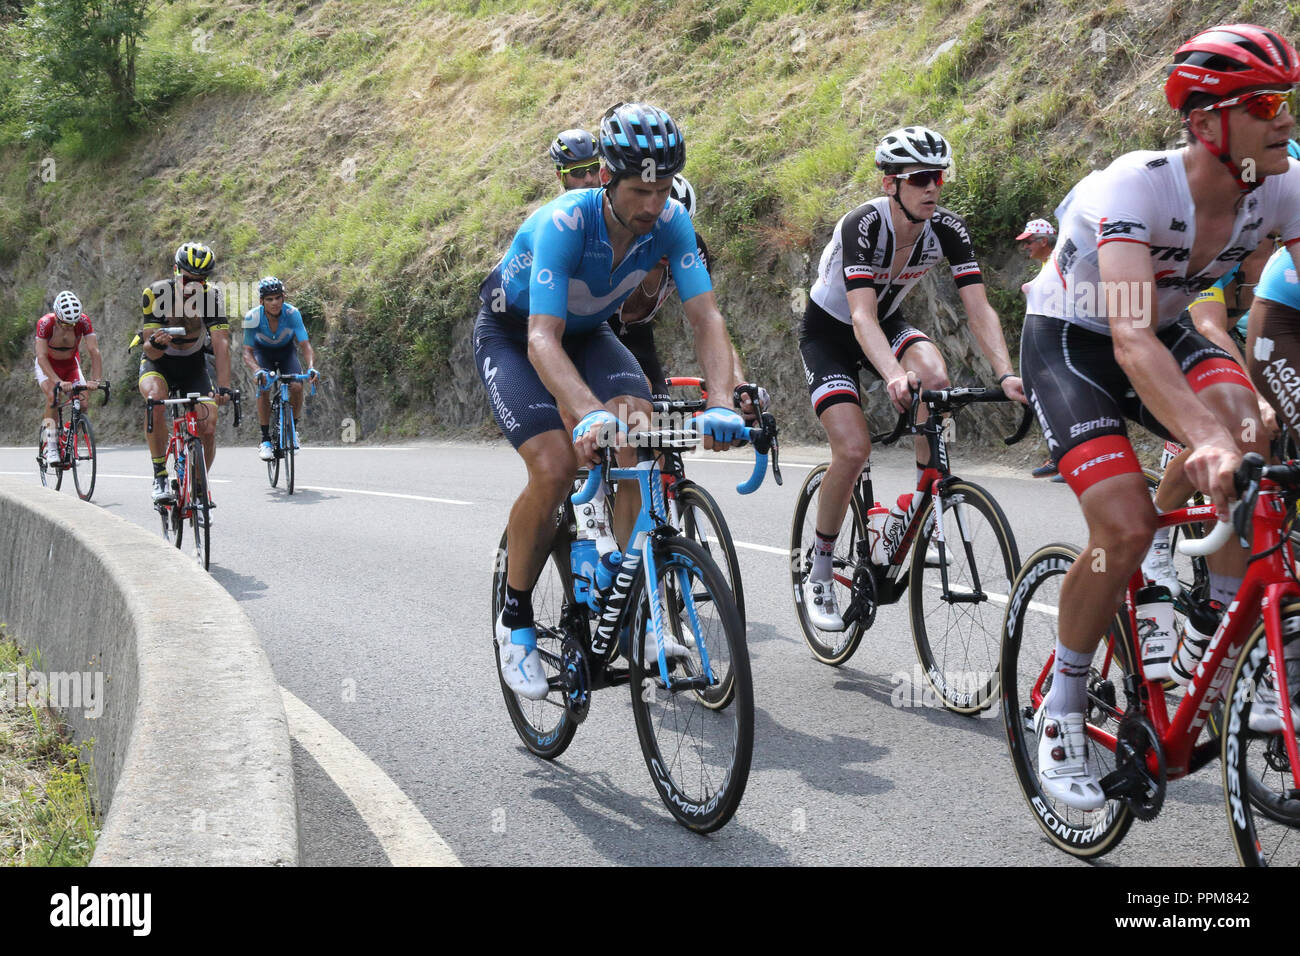 Daniele Bennati and other cyclists climbing during the 2018 Tour de France 17th stage in Soulan, in the French Pyrenees. Stock Photo